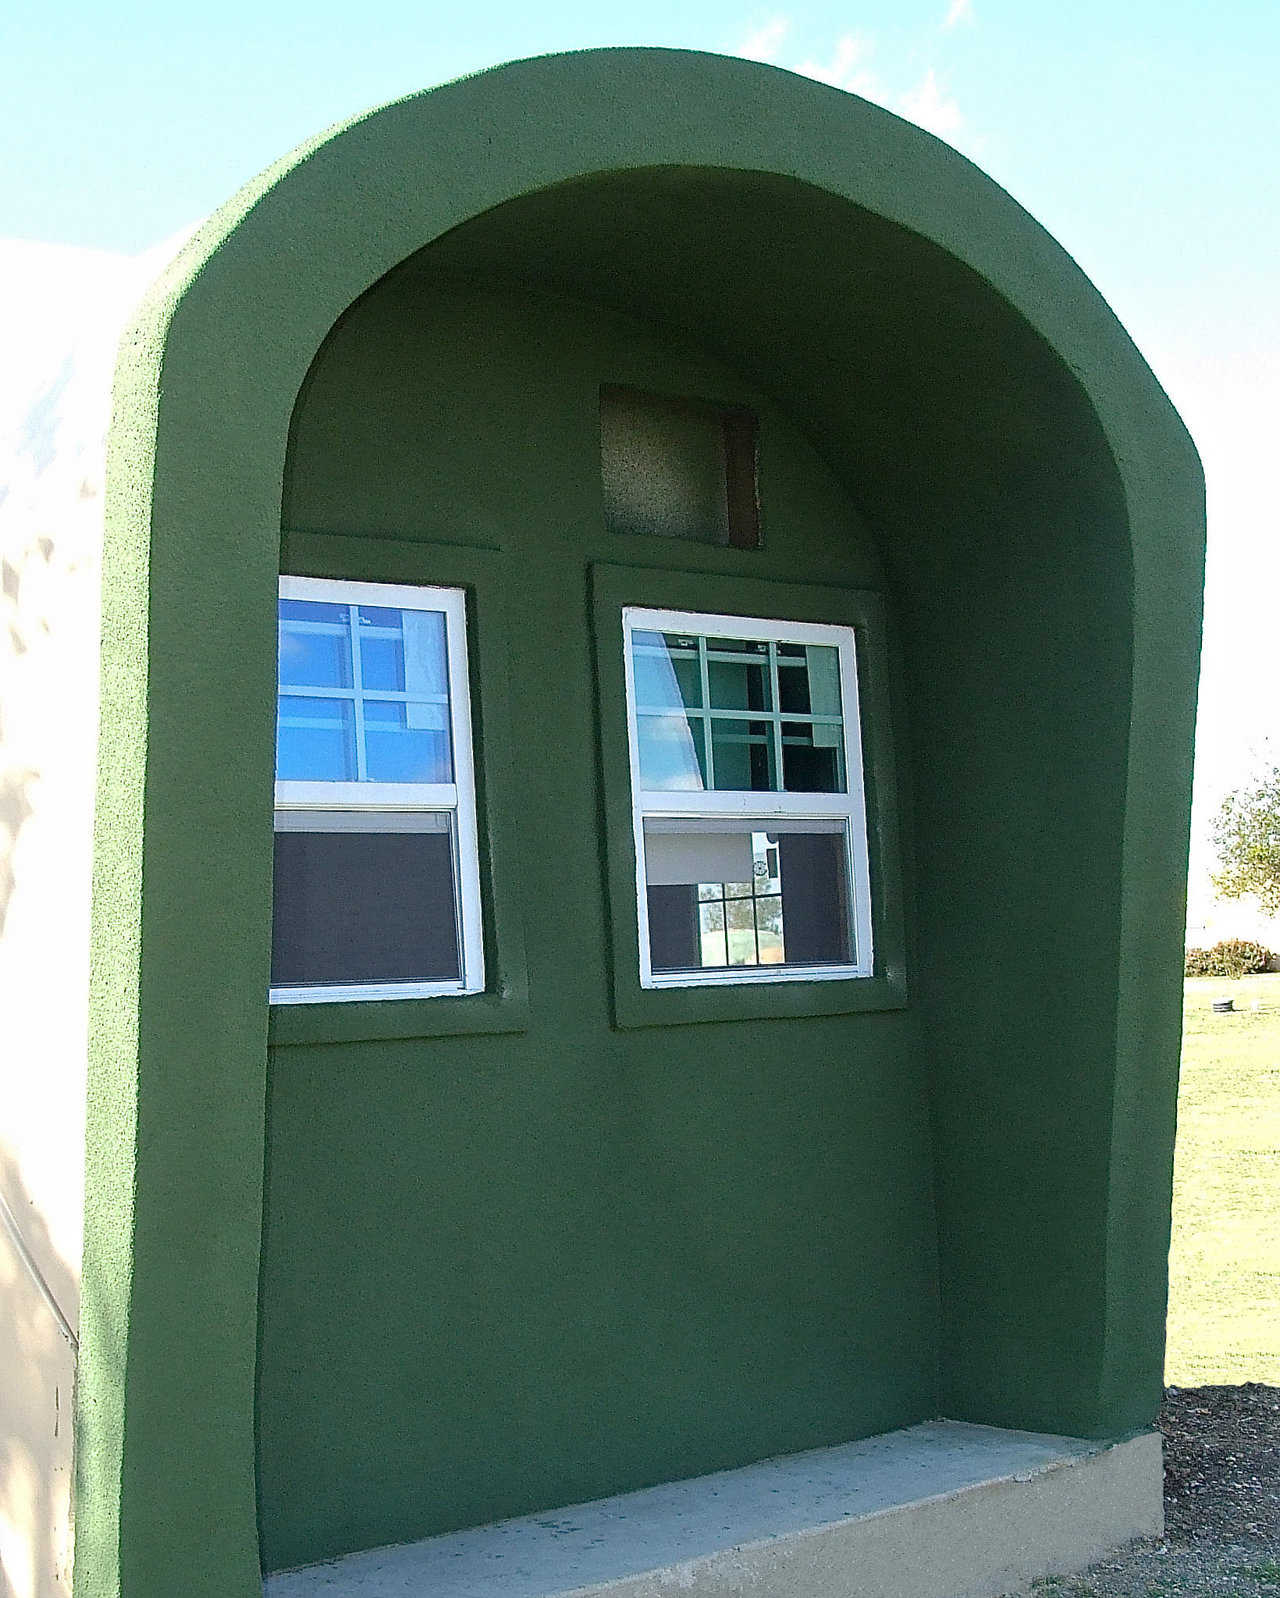 The back of the dome has an augment over the windows. Mike painted both augments a dark green that attractively contrasts with the white trim.